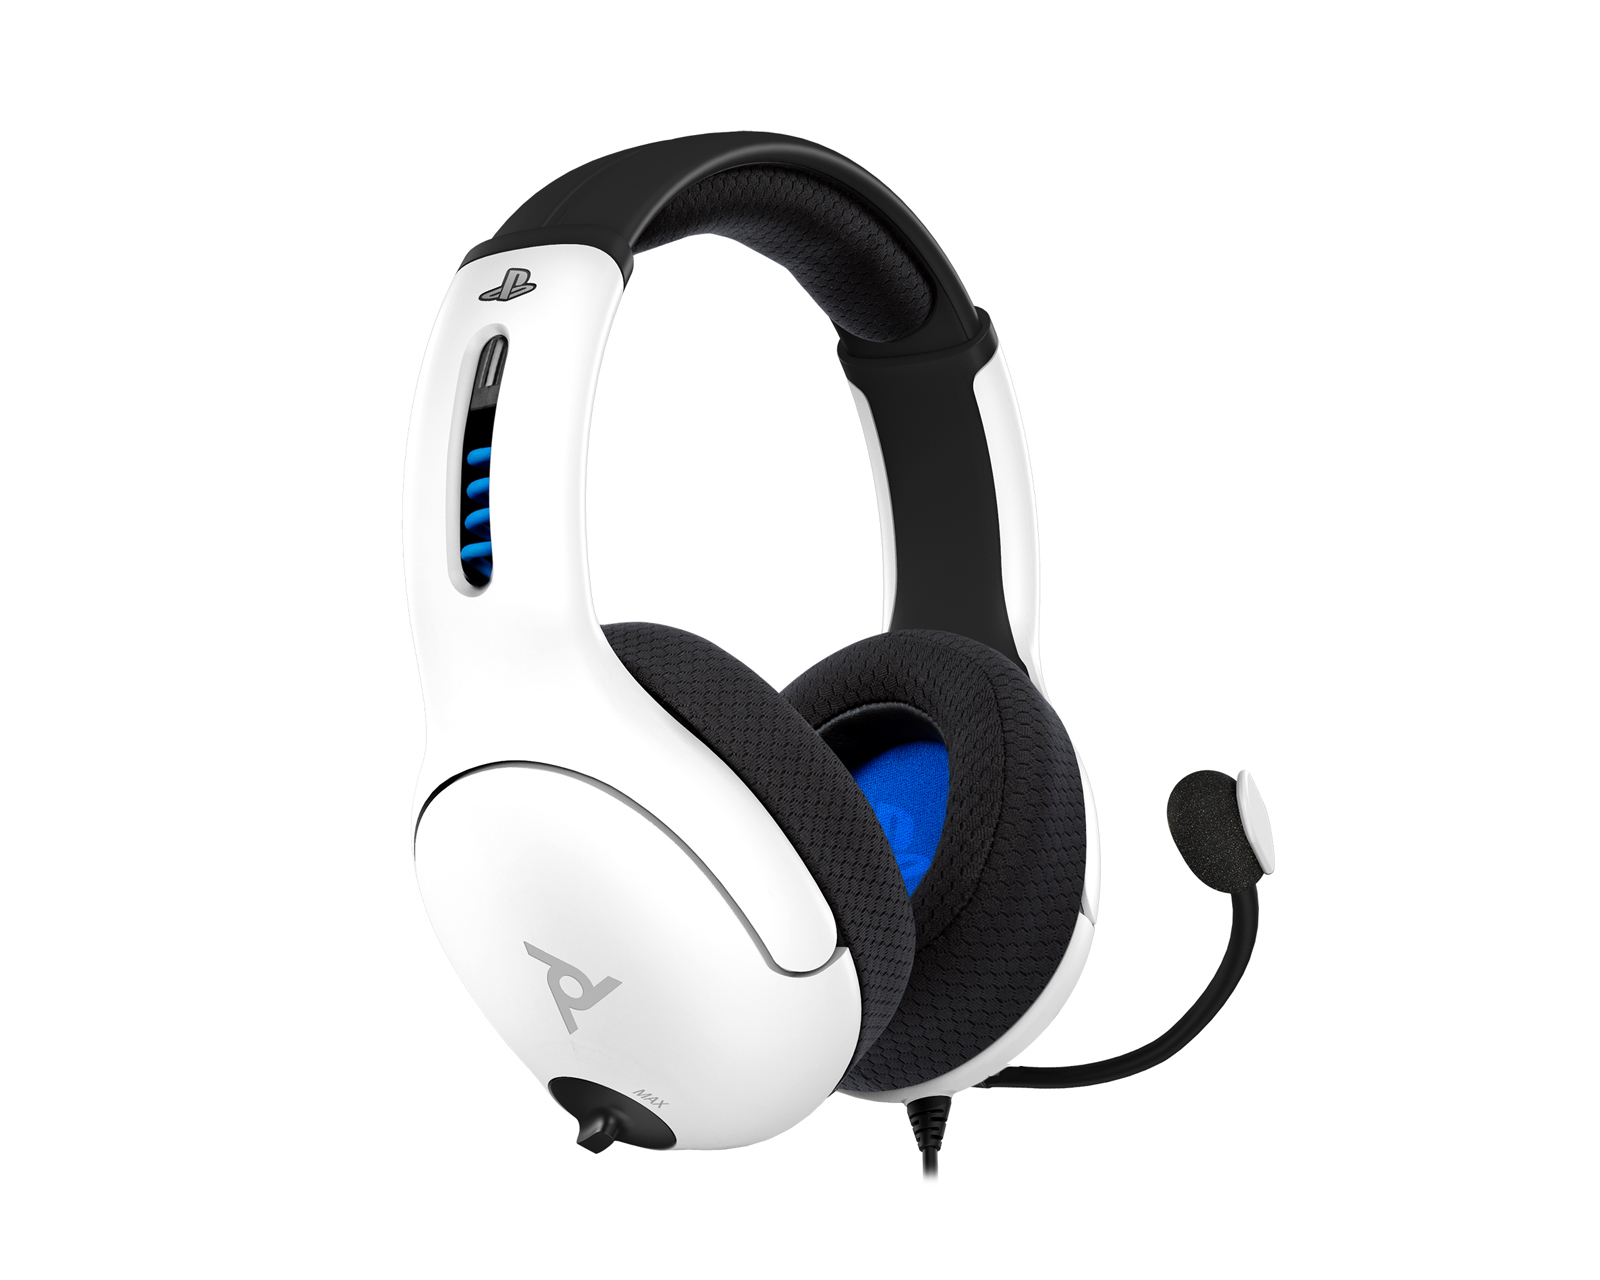 PDP LVL50 Wired Stereo Gaming Headset Grey (ps4)